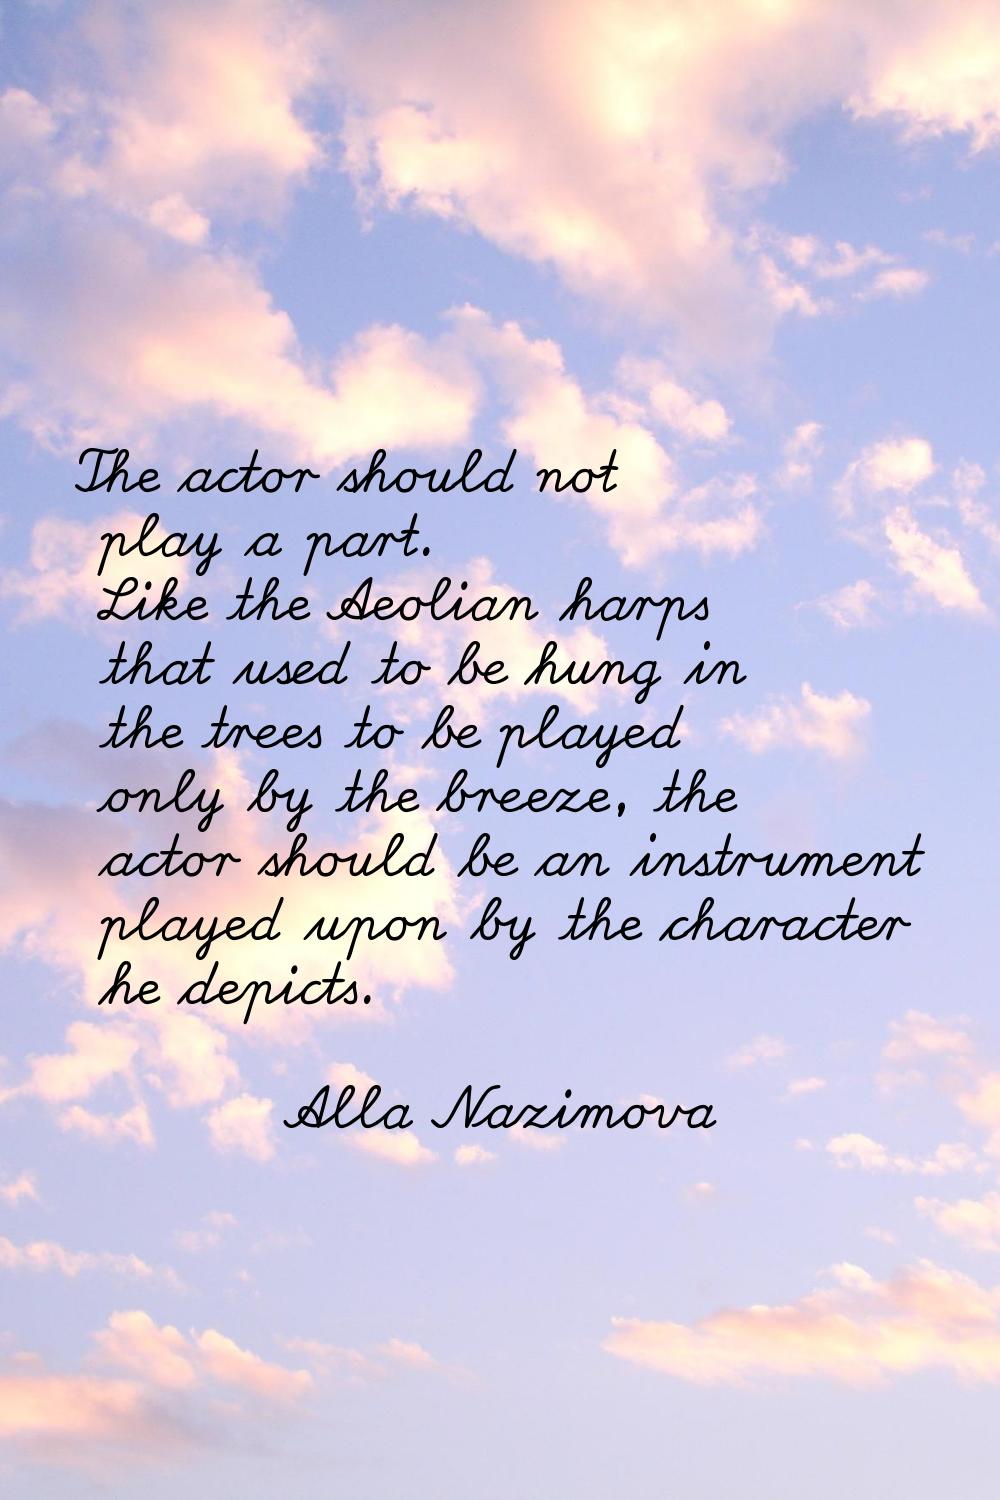 The actor should not play a part. Like the Aeolian harps that used to be hung in the trees to be pl